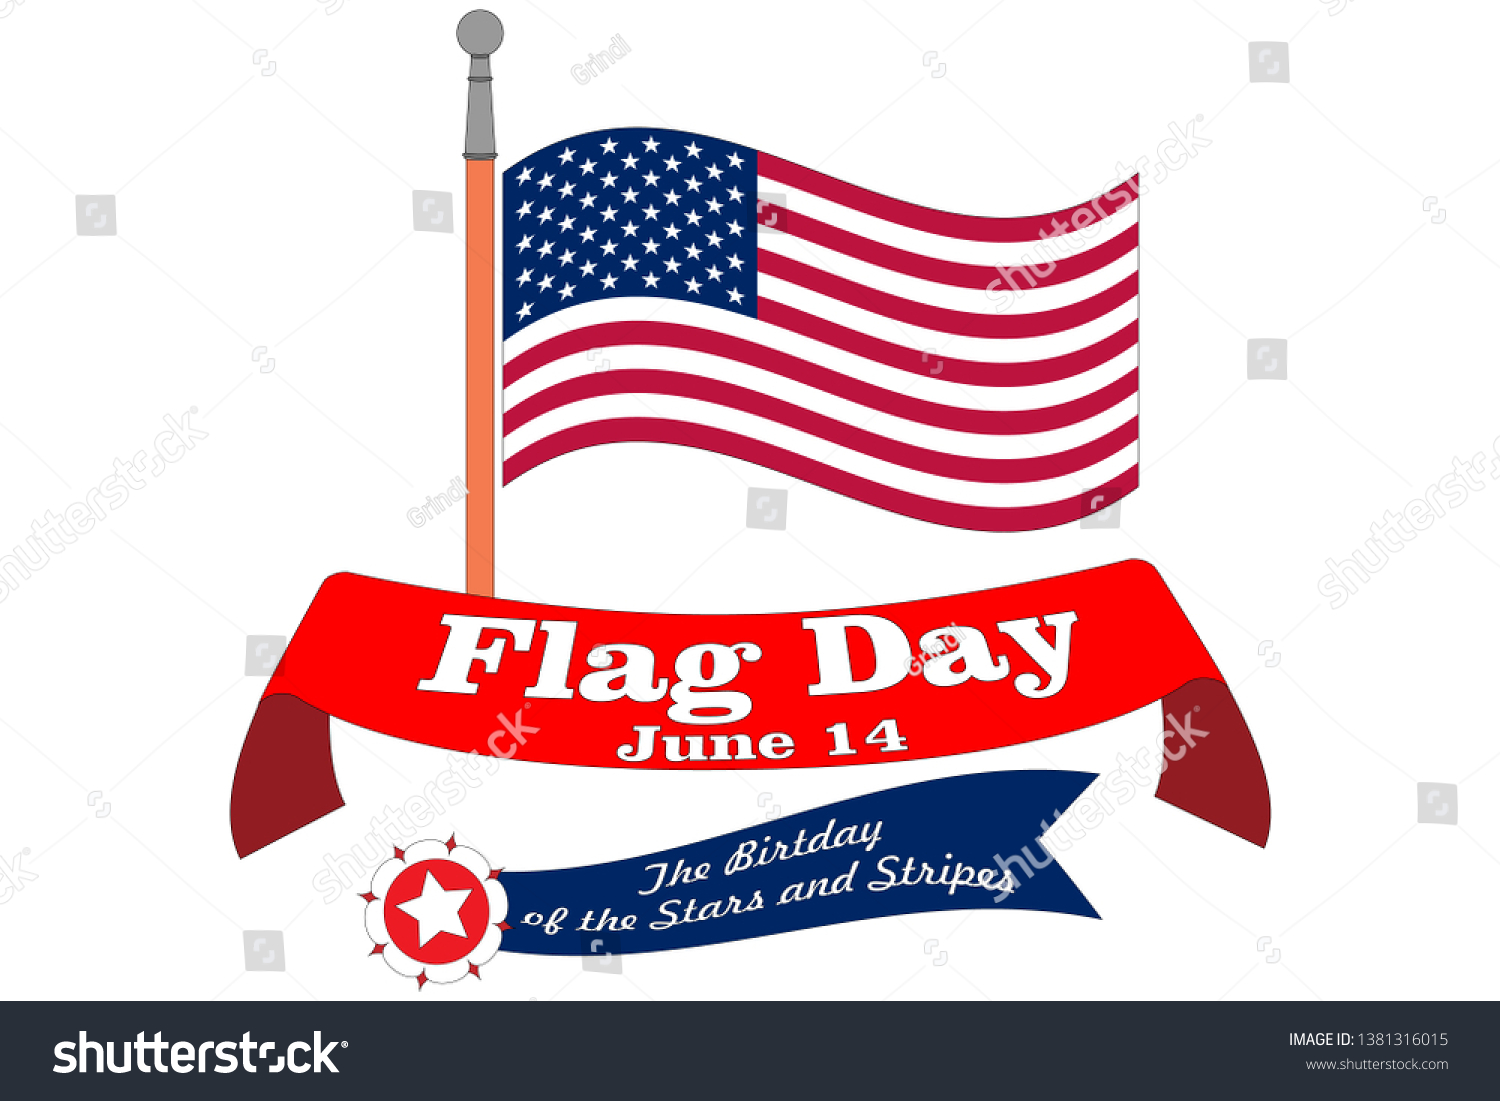 SVG of Flag Day banner. Poster for June 14 Birthday of American Stars and Stripes. Waved USA national symbol on flagstaff with text ribbons and emblems in colours. Traditional signs of independence holiday svg